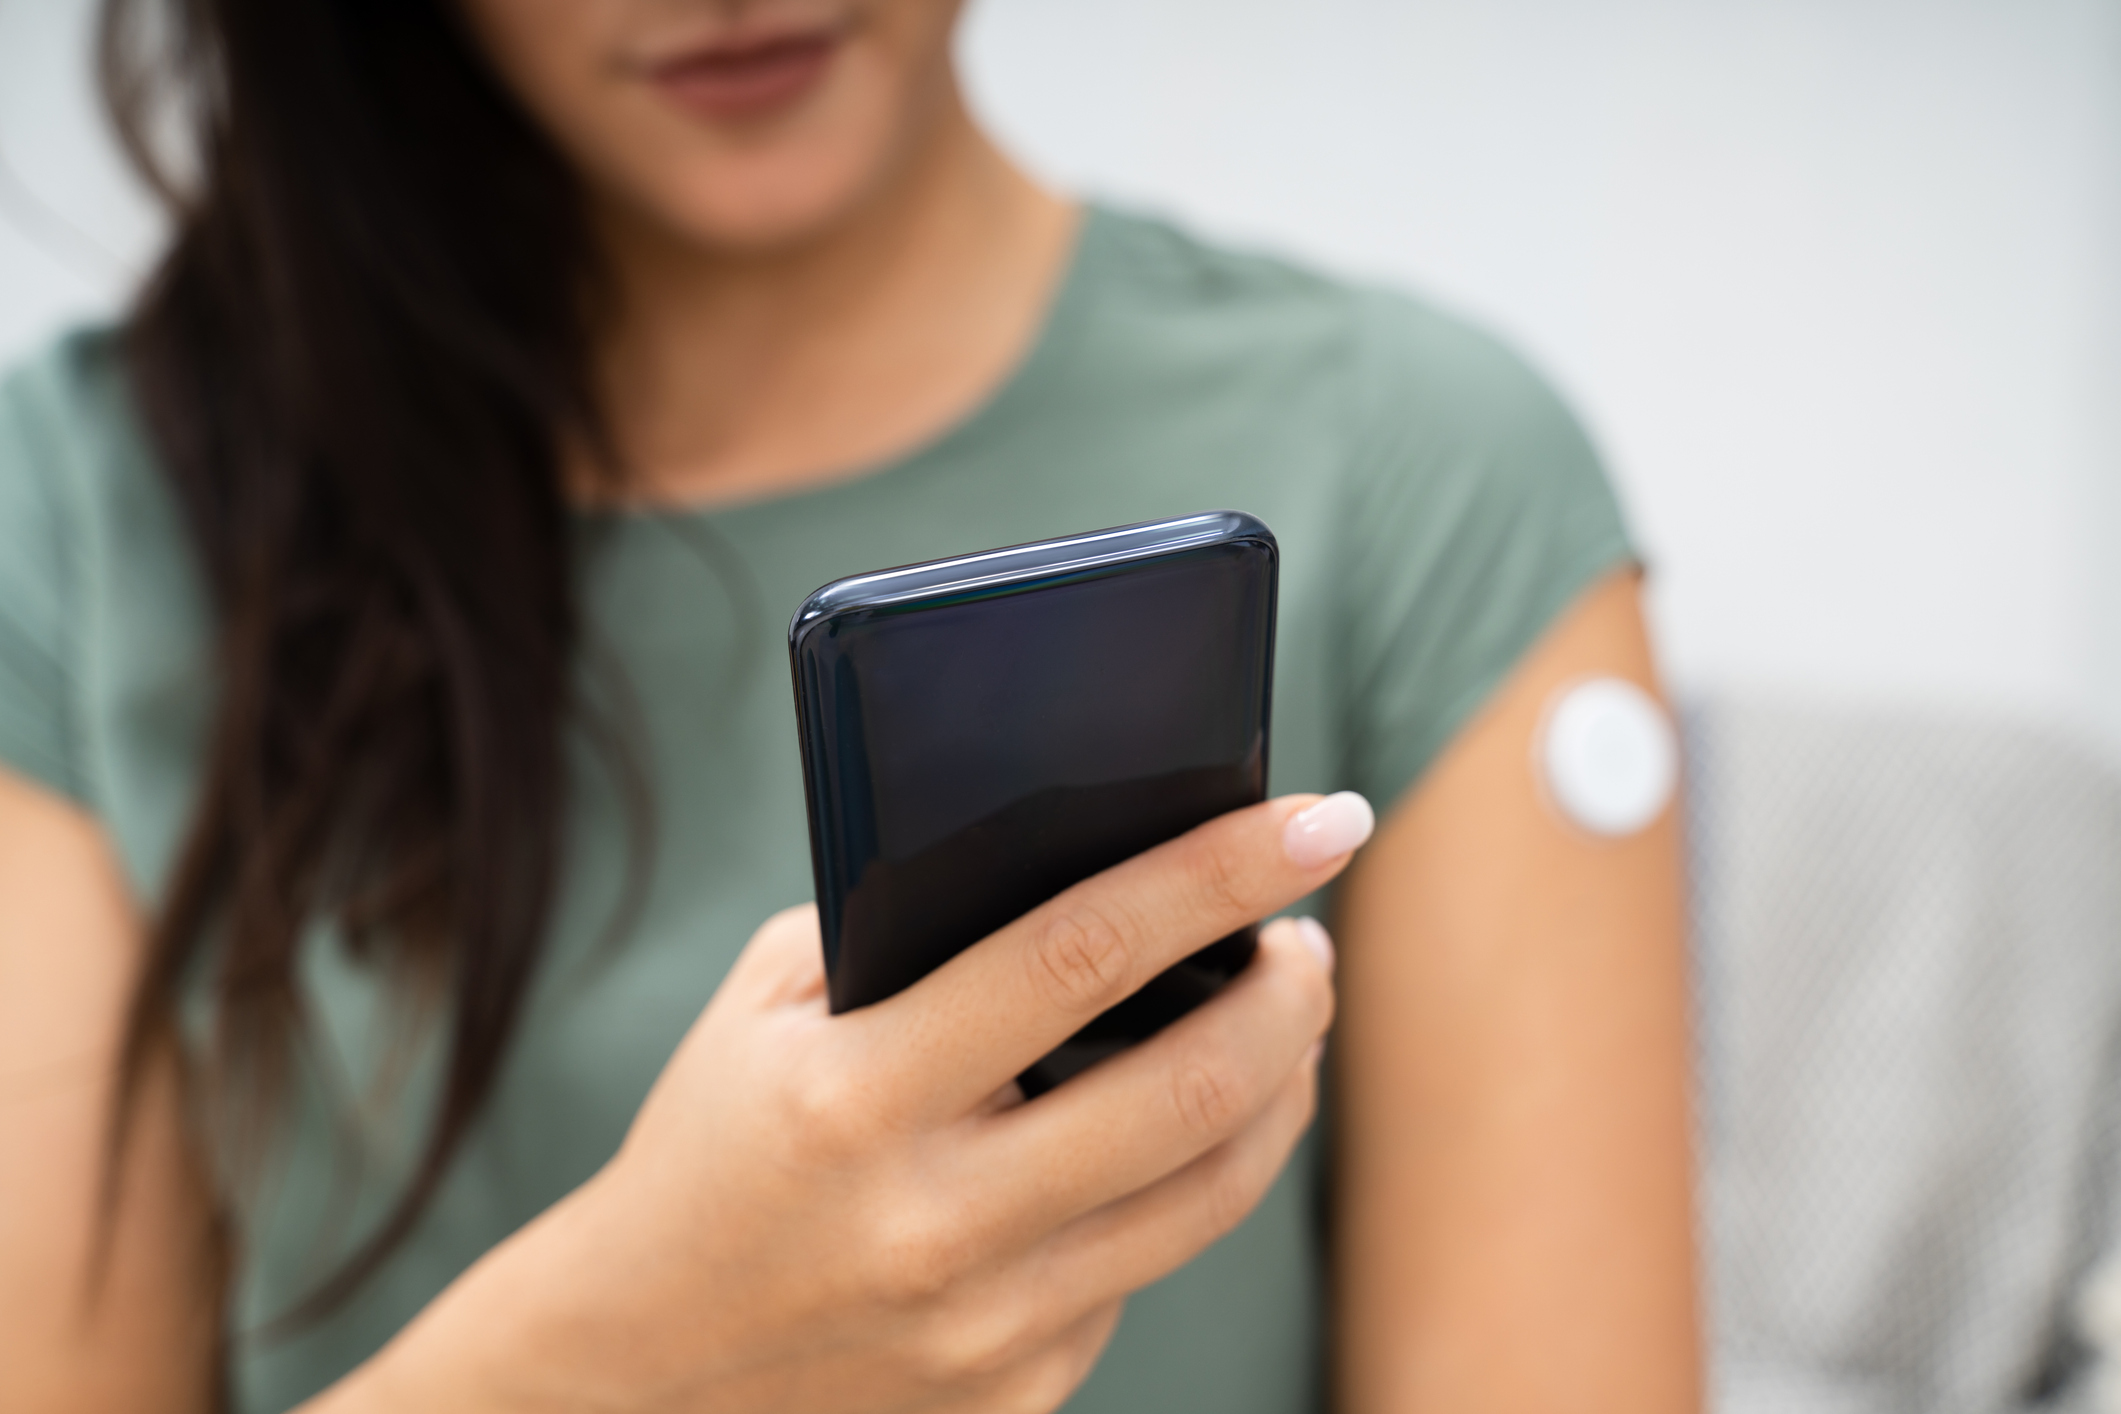 Image shows a woman holding a cellphone while she tracks her blood sugar with her glucose monitor on her arm